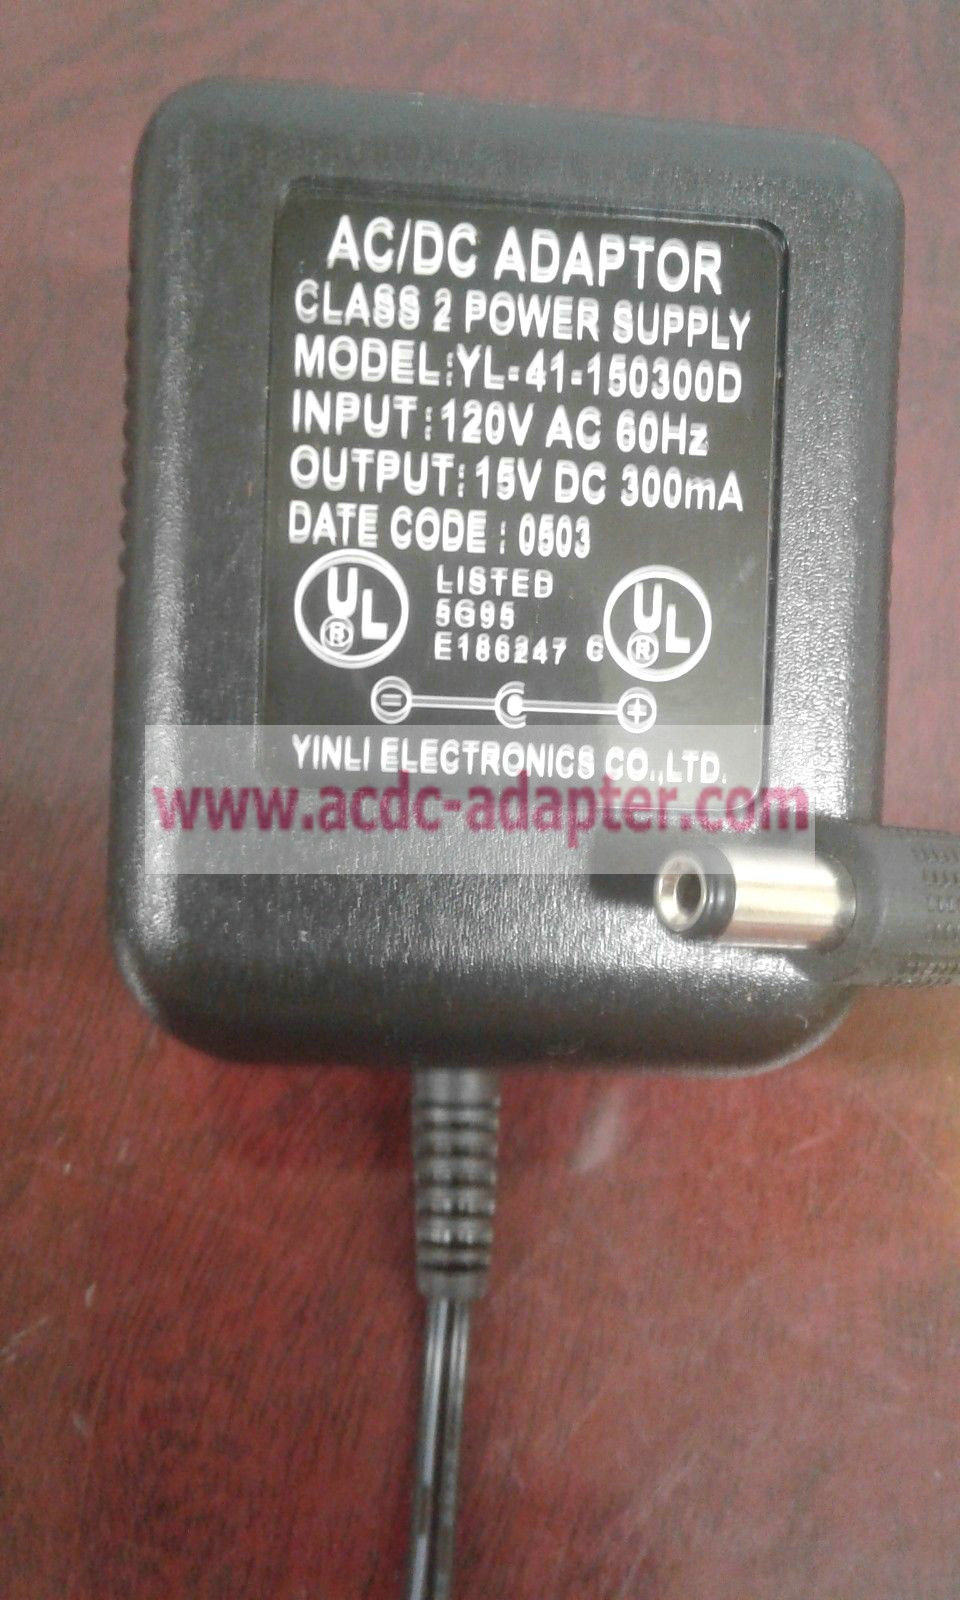 Genuine 15V 300mA Yinli Electronics YL-41-150300D AC/DC Adapter Class 2 power supp - Click Image to Close